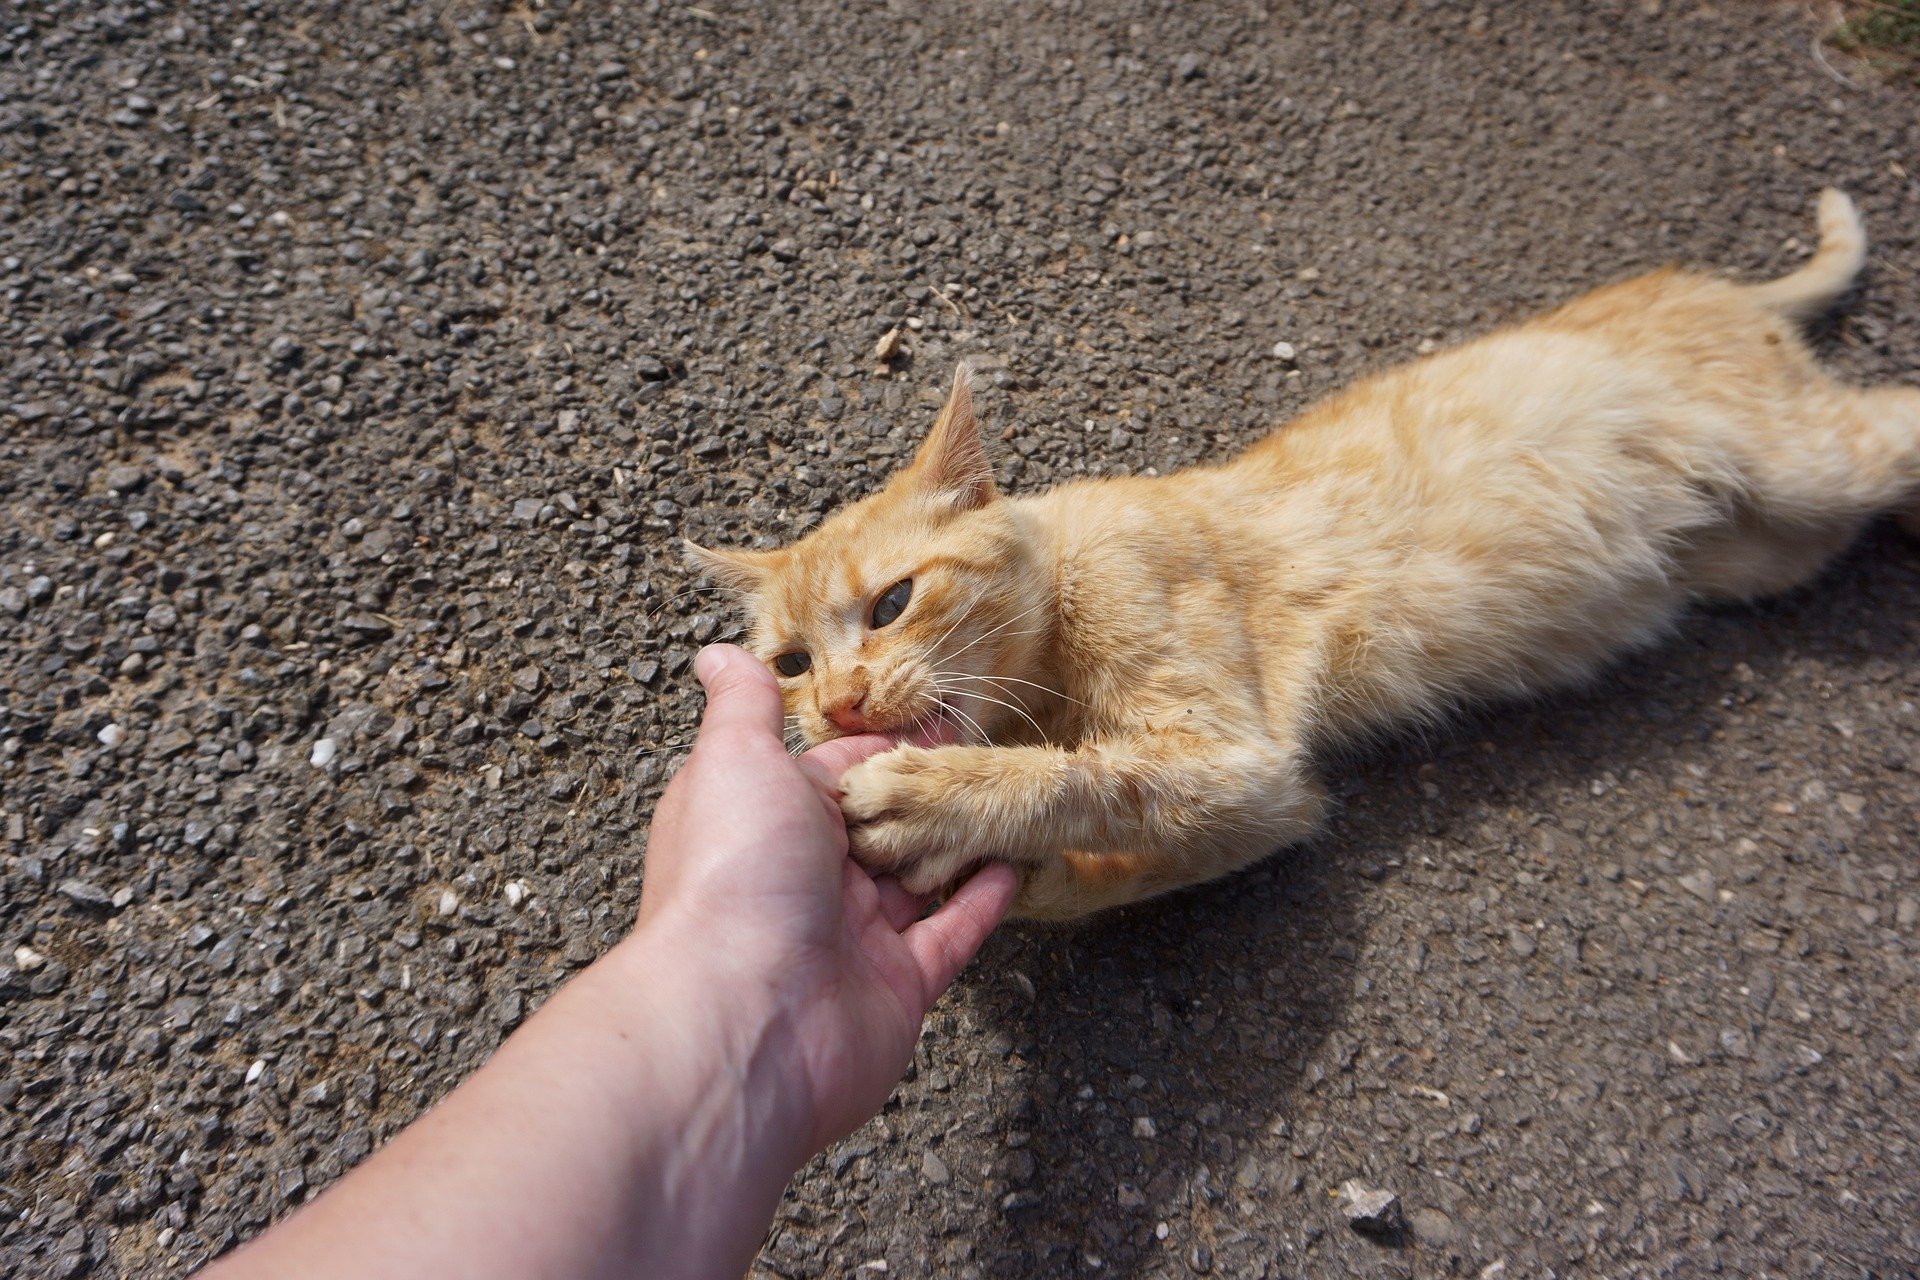 An orange cat biting a person's hand